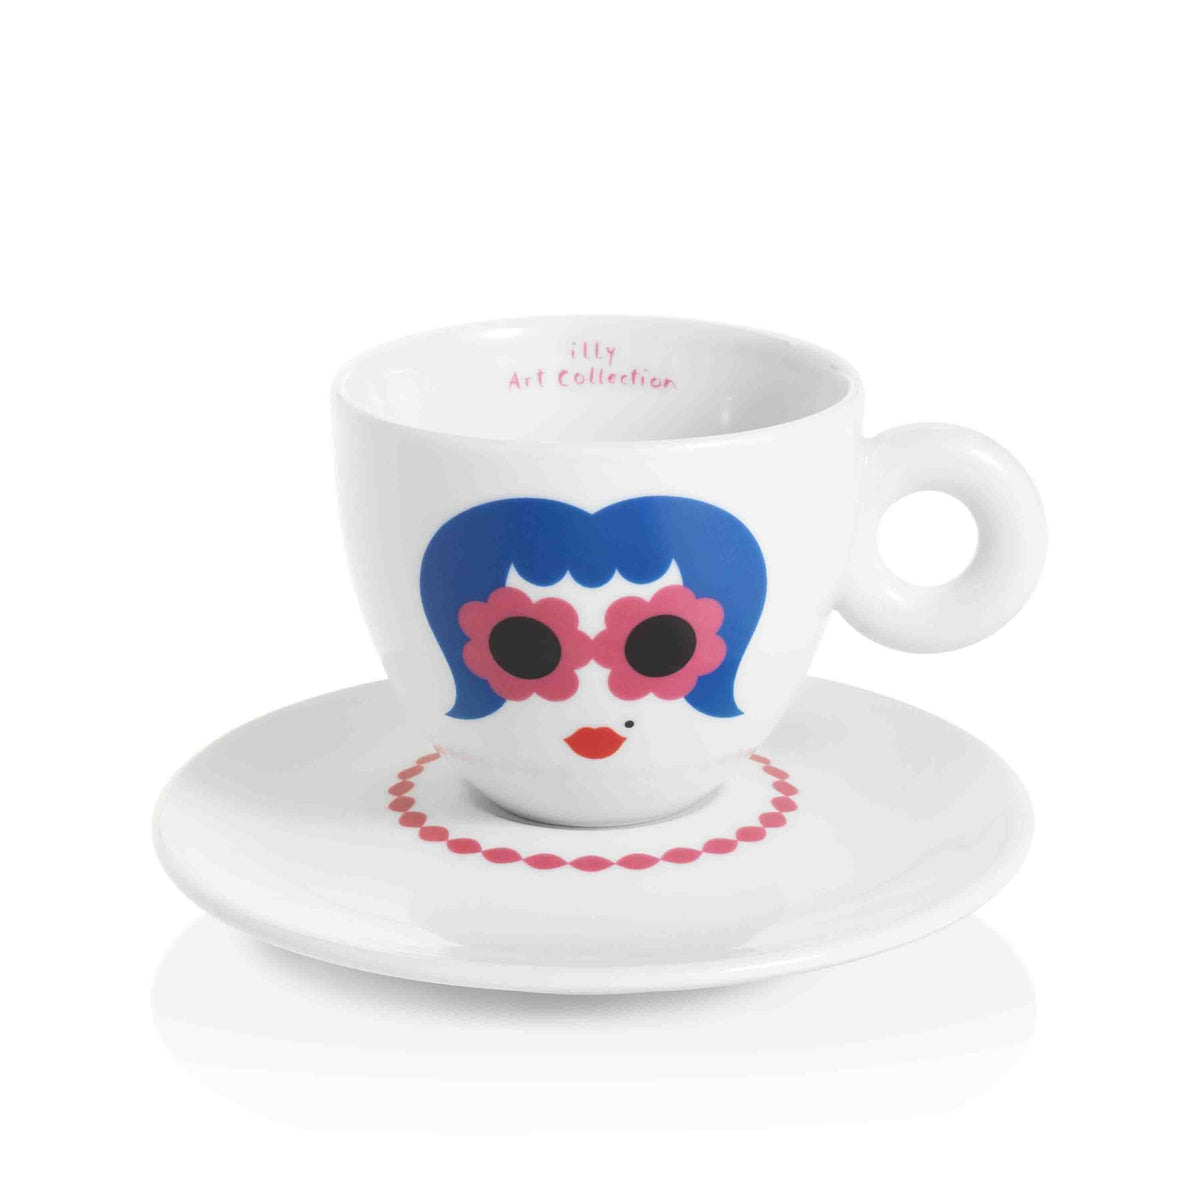 droog Resistent Verkeersopstopping illy Art Collection Olimpia Zagnoli Cappuccino Cups - Set of 2 - Whole  Latte Love